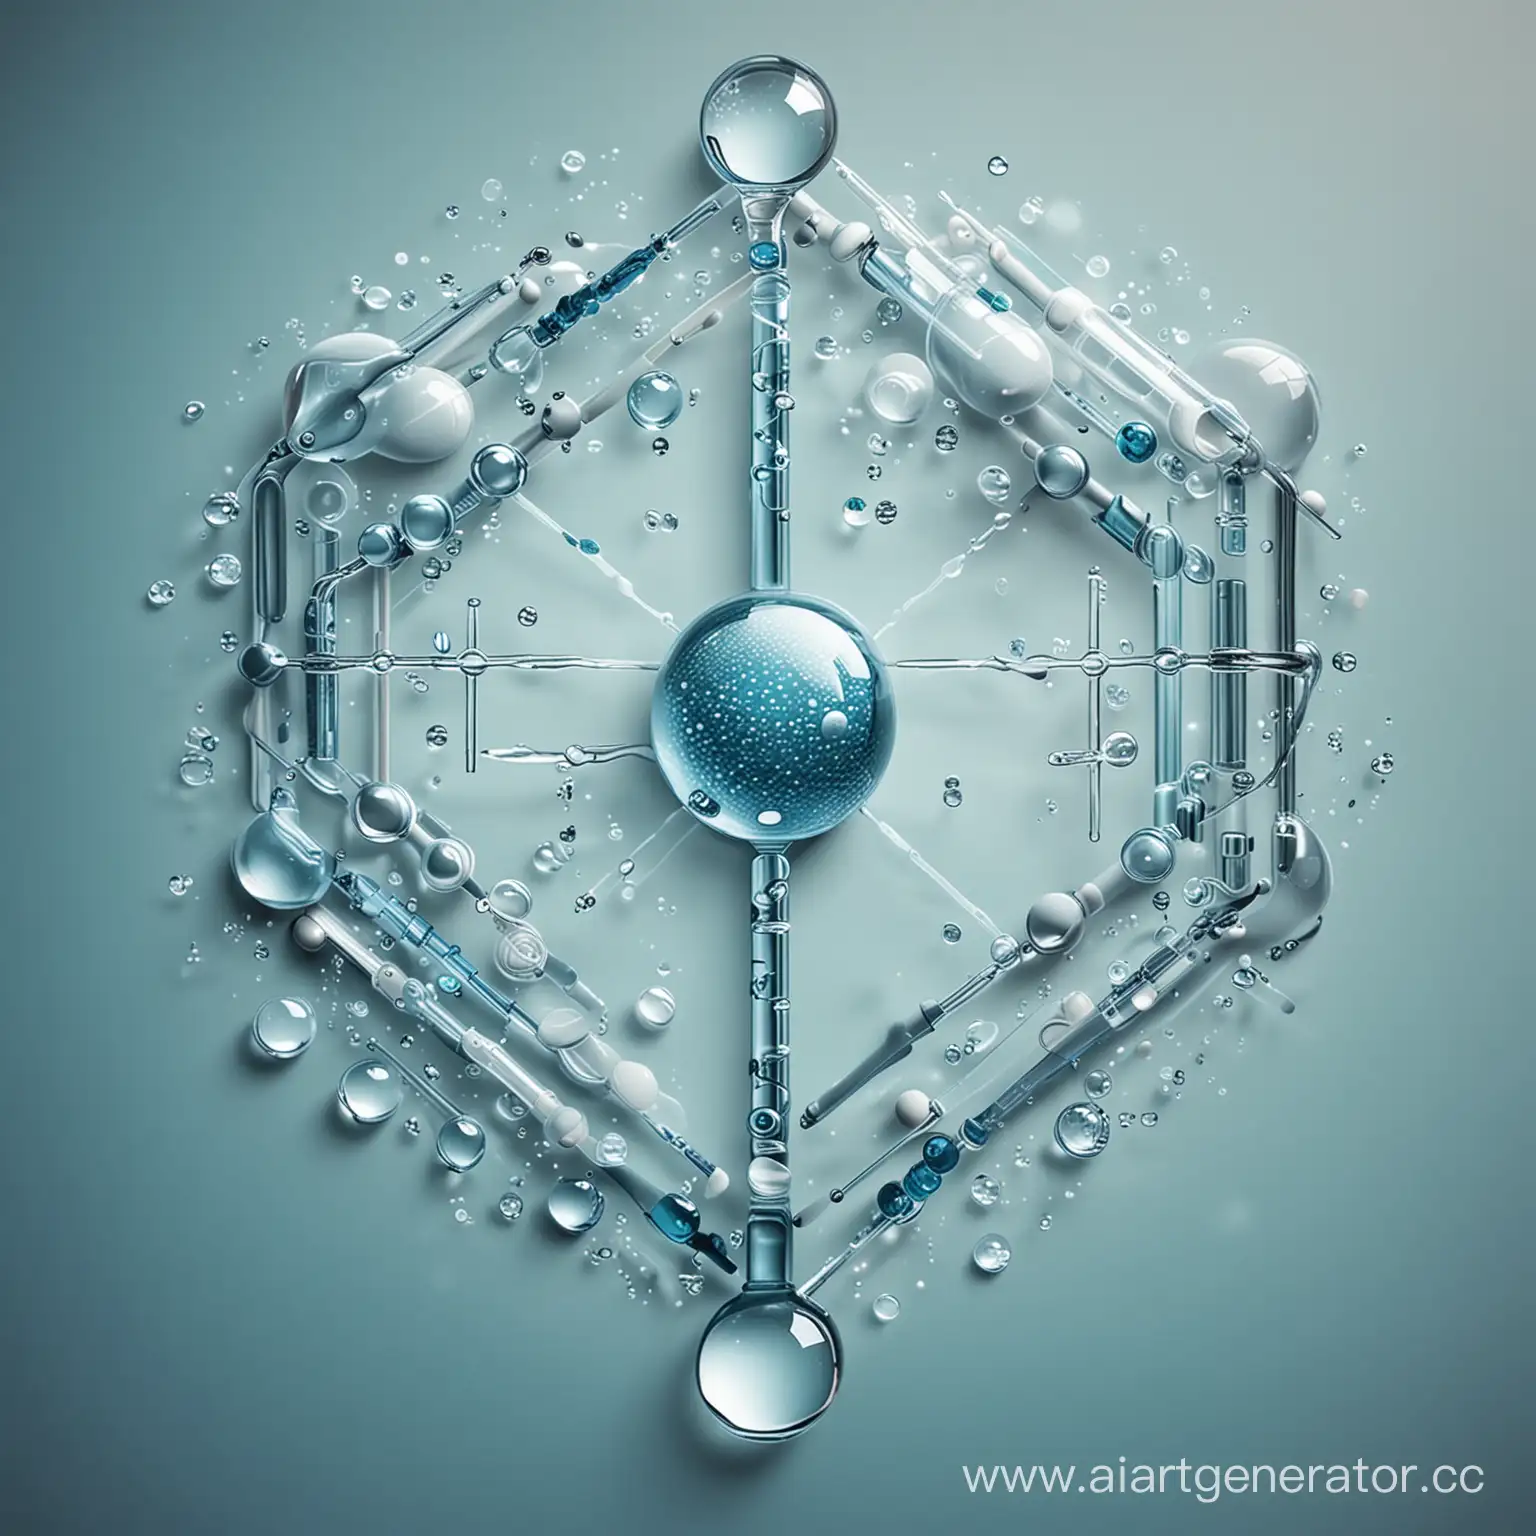 Futuristic-Medical-Devices-Integrating-Water-Molecule-Structure